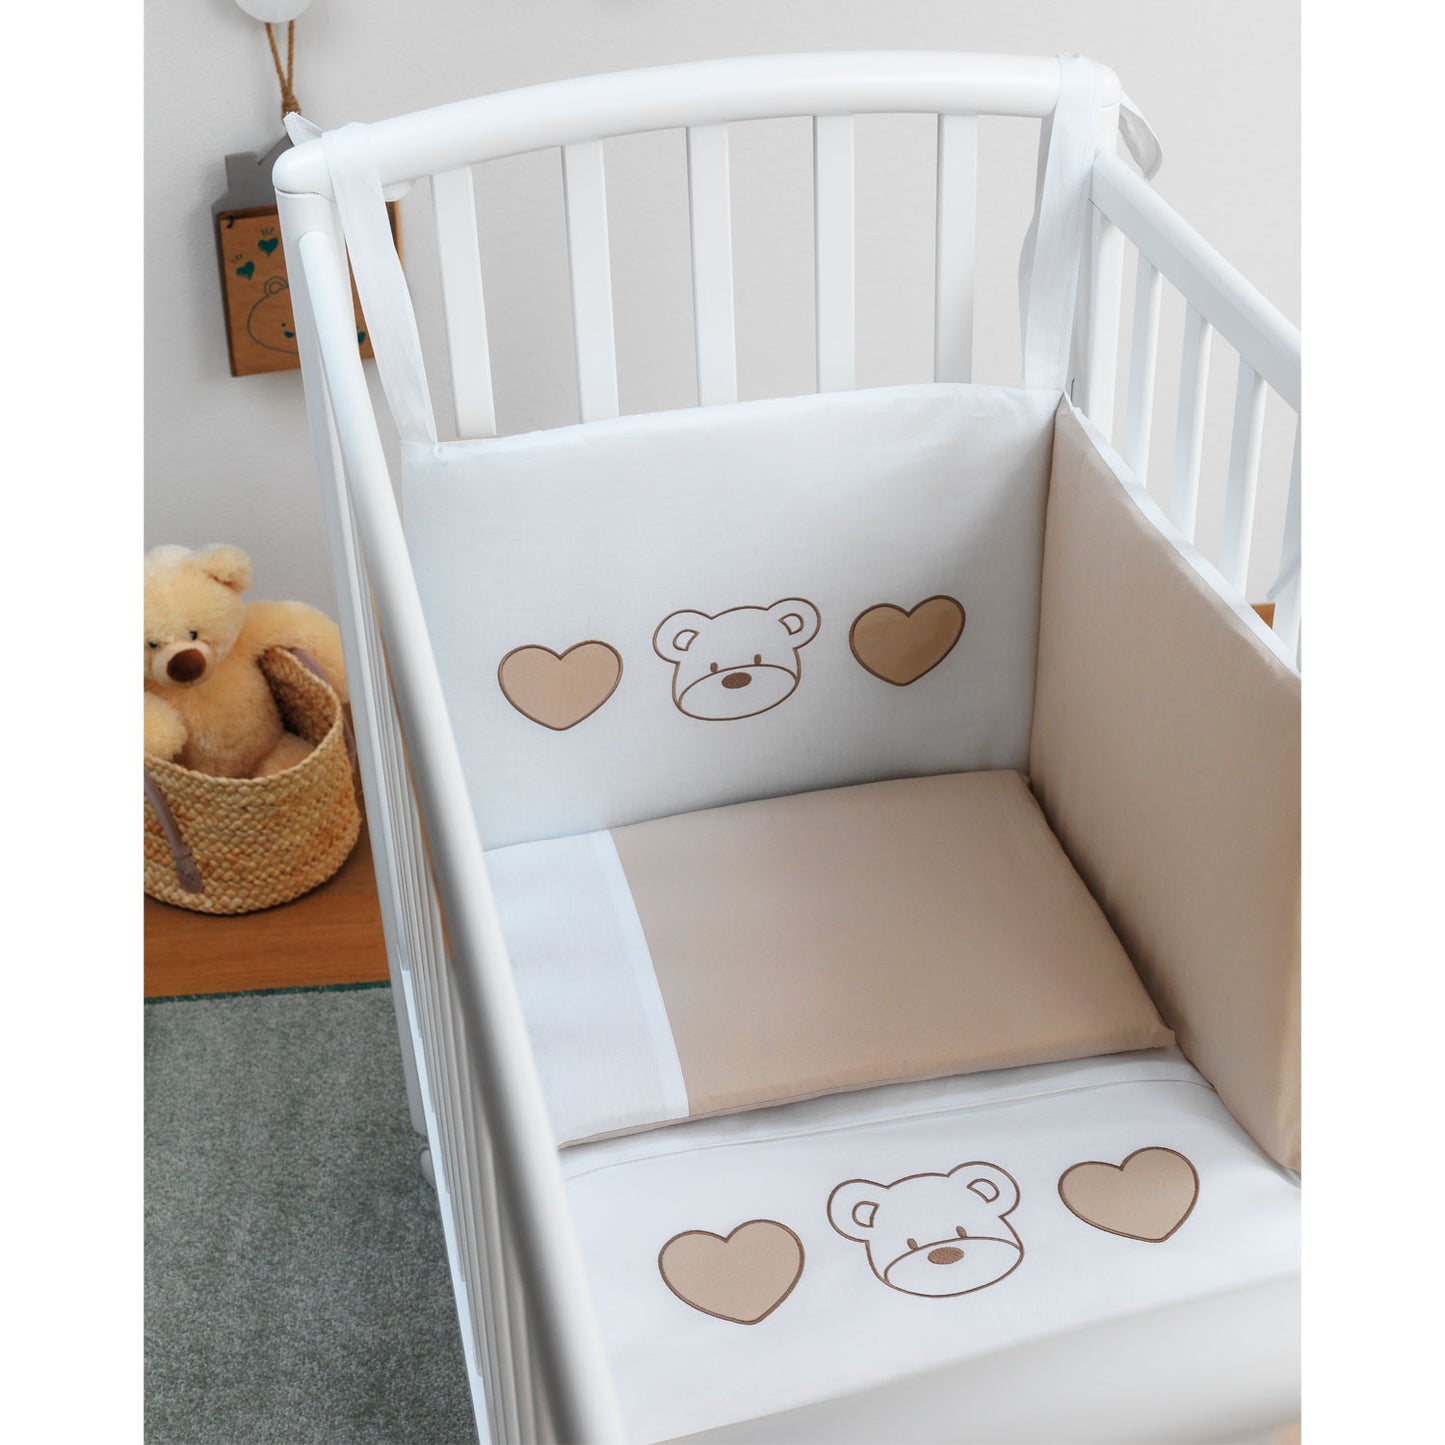 City Baby Cot by Pali